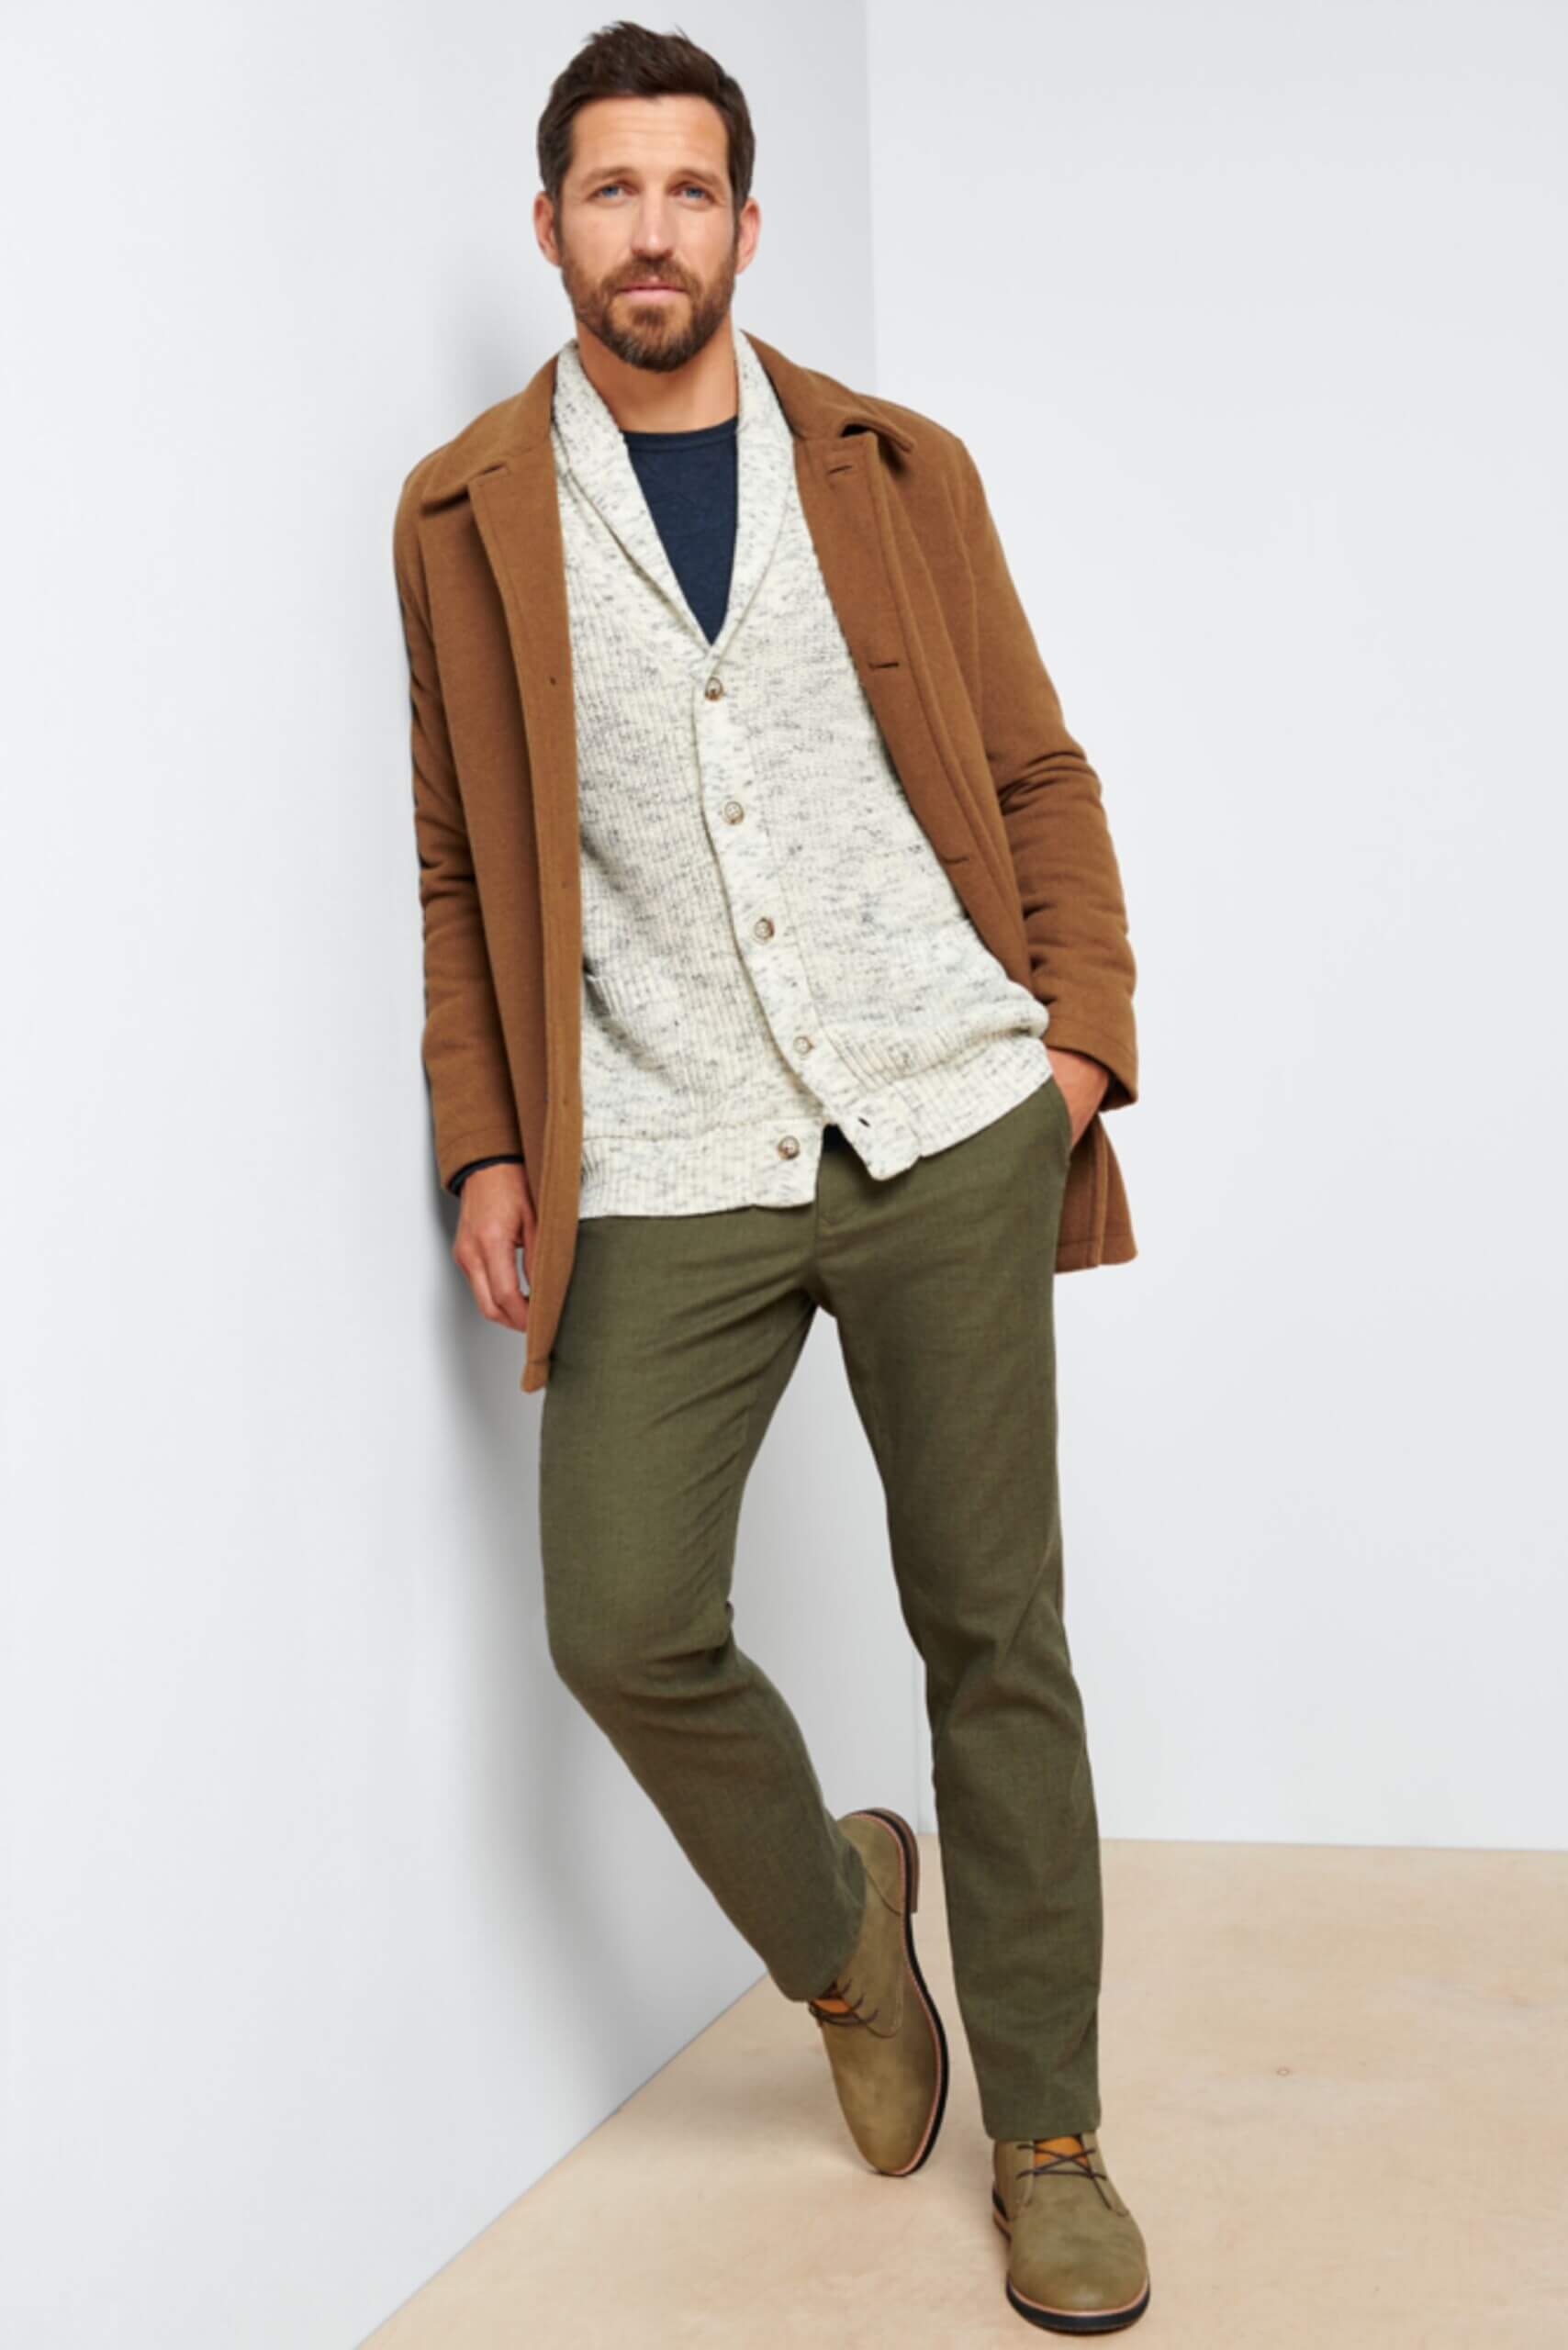 Are Cardigans In Style For Guys?